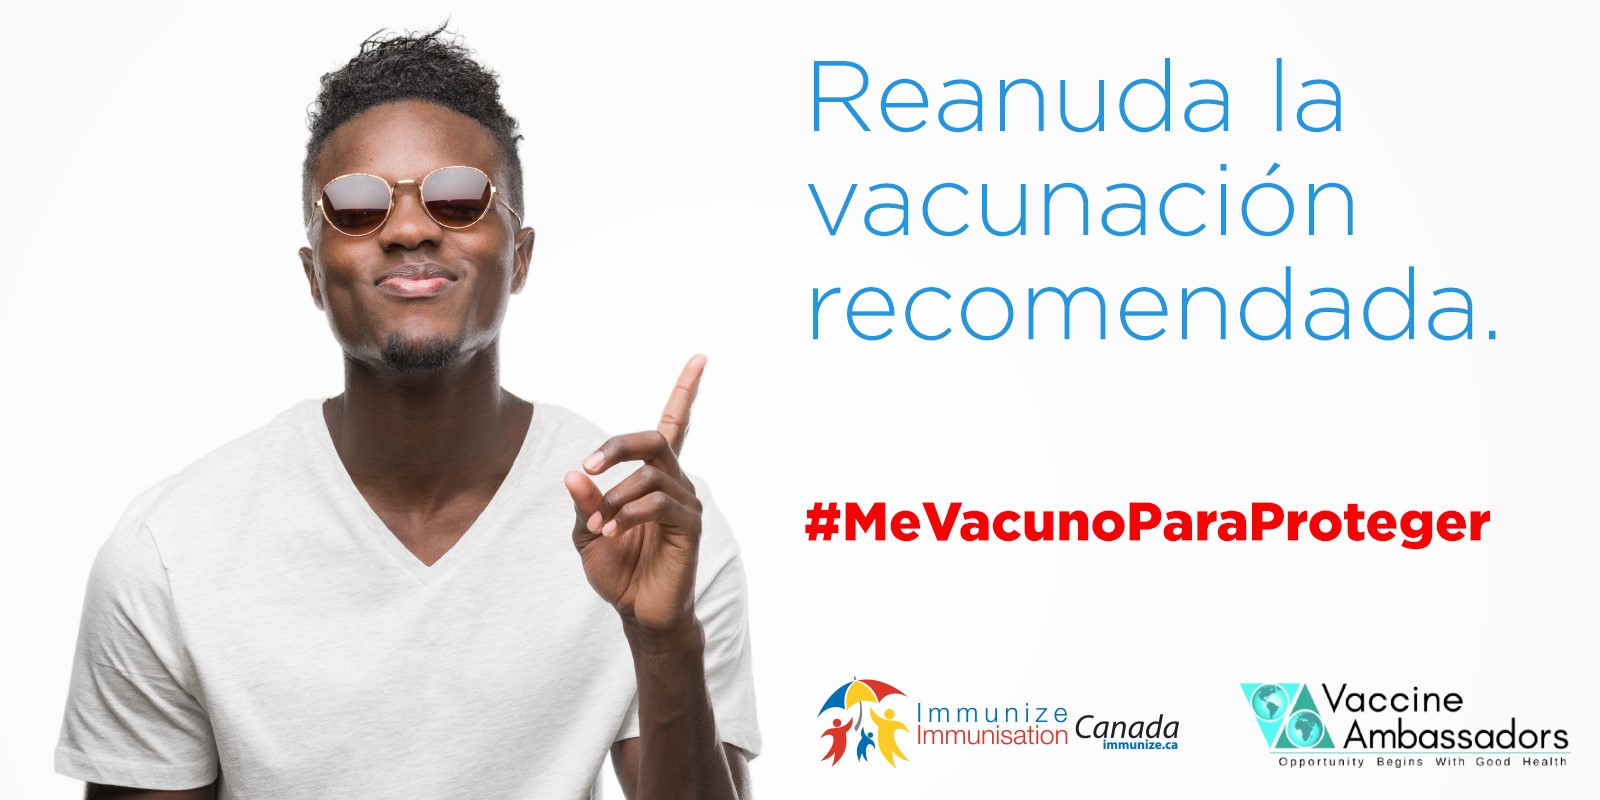 Adults: Get back on track with recommended vaccines. | Spanish